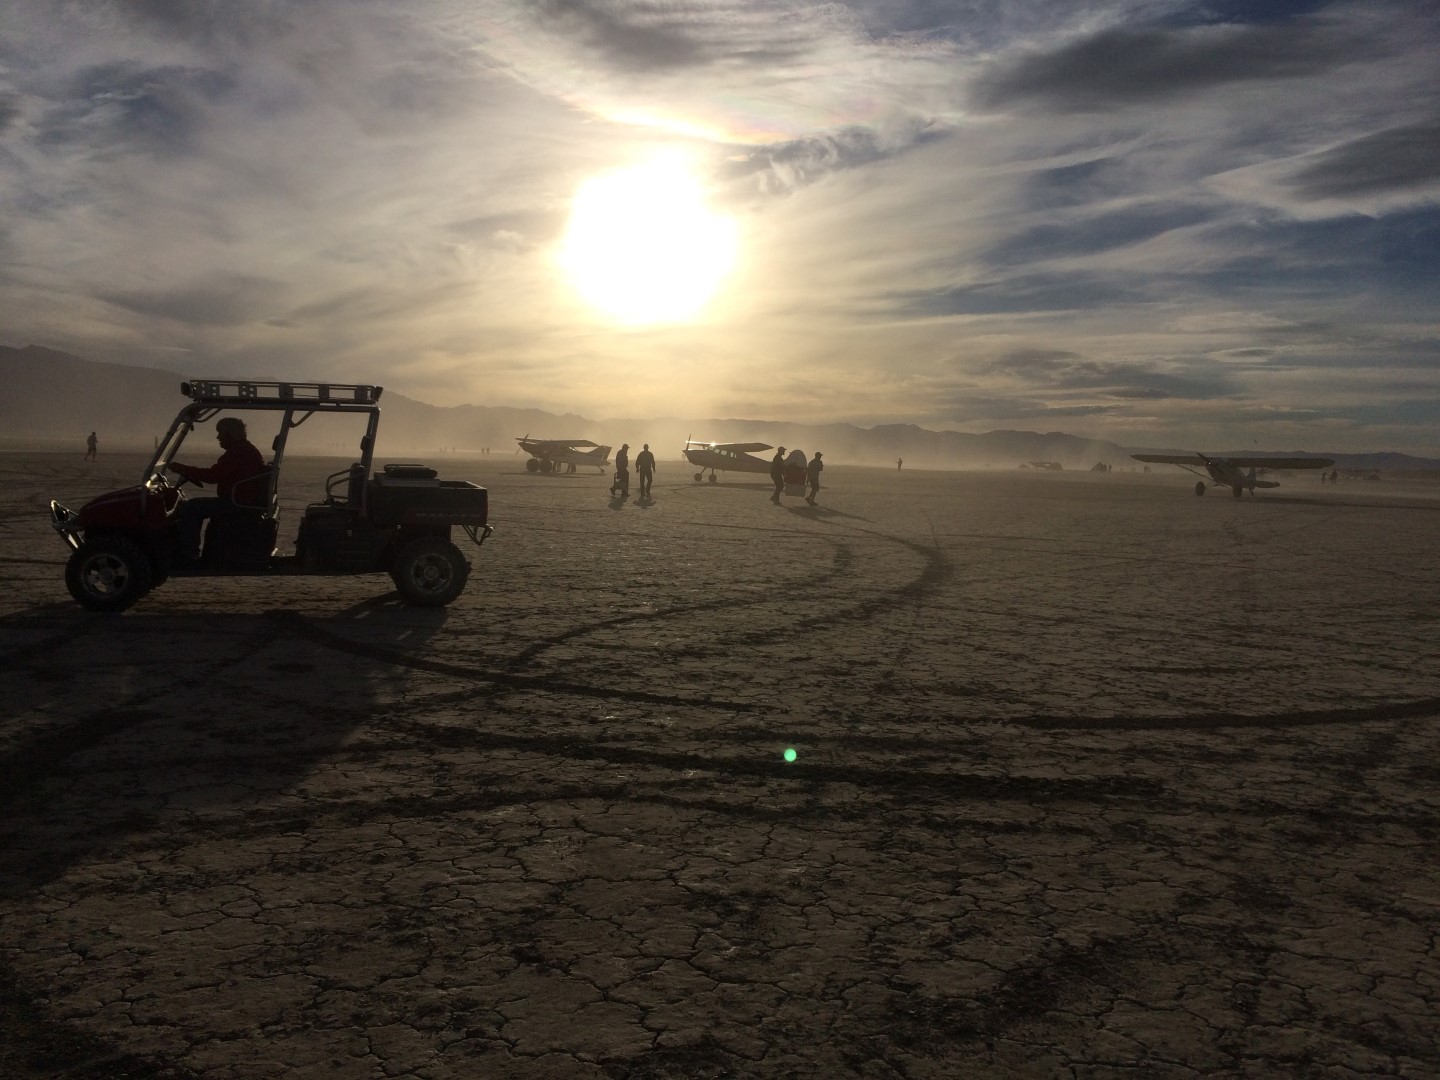 Winds or prop wash kick up playa dust, but that’s part of being out in the desert. Not everyone flies in; some people drive in with RVs, pickups, or trailers that also pack golf carts or ATVs. Photo by Nadine Burak.